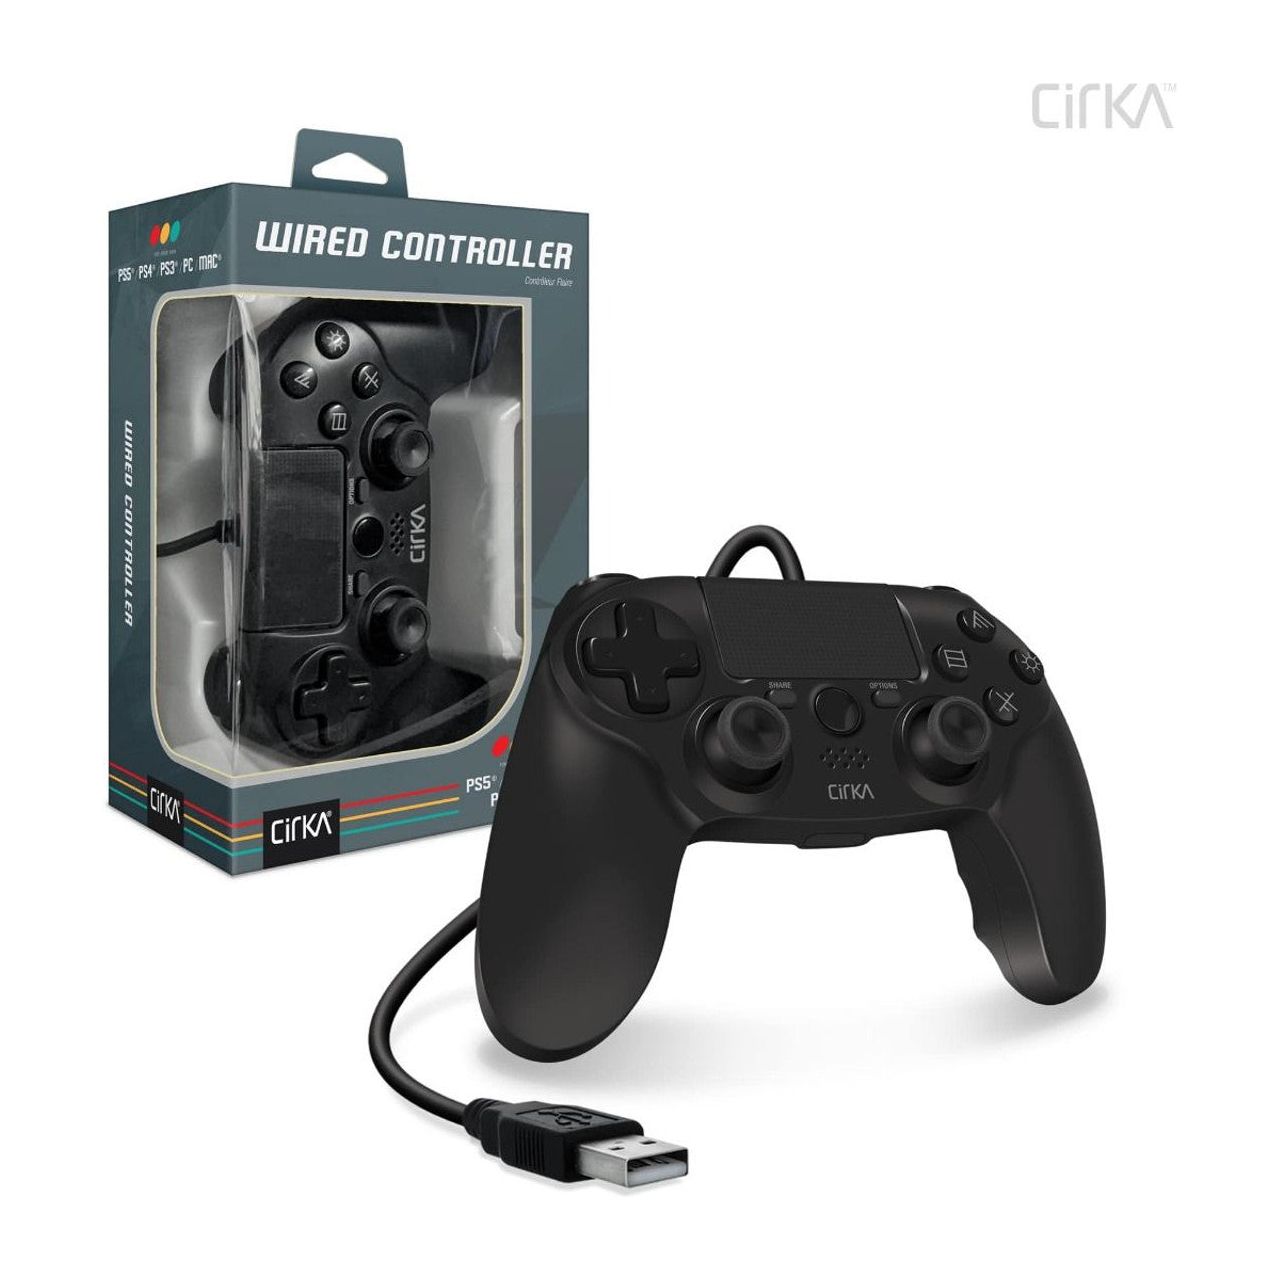 NuForce Wired Controller for PS4, PS3 and PC/MAC (Black)